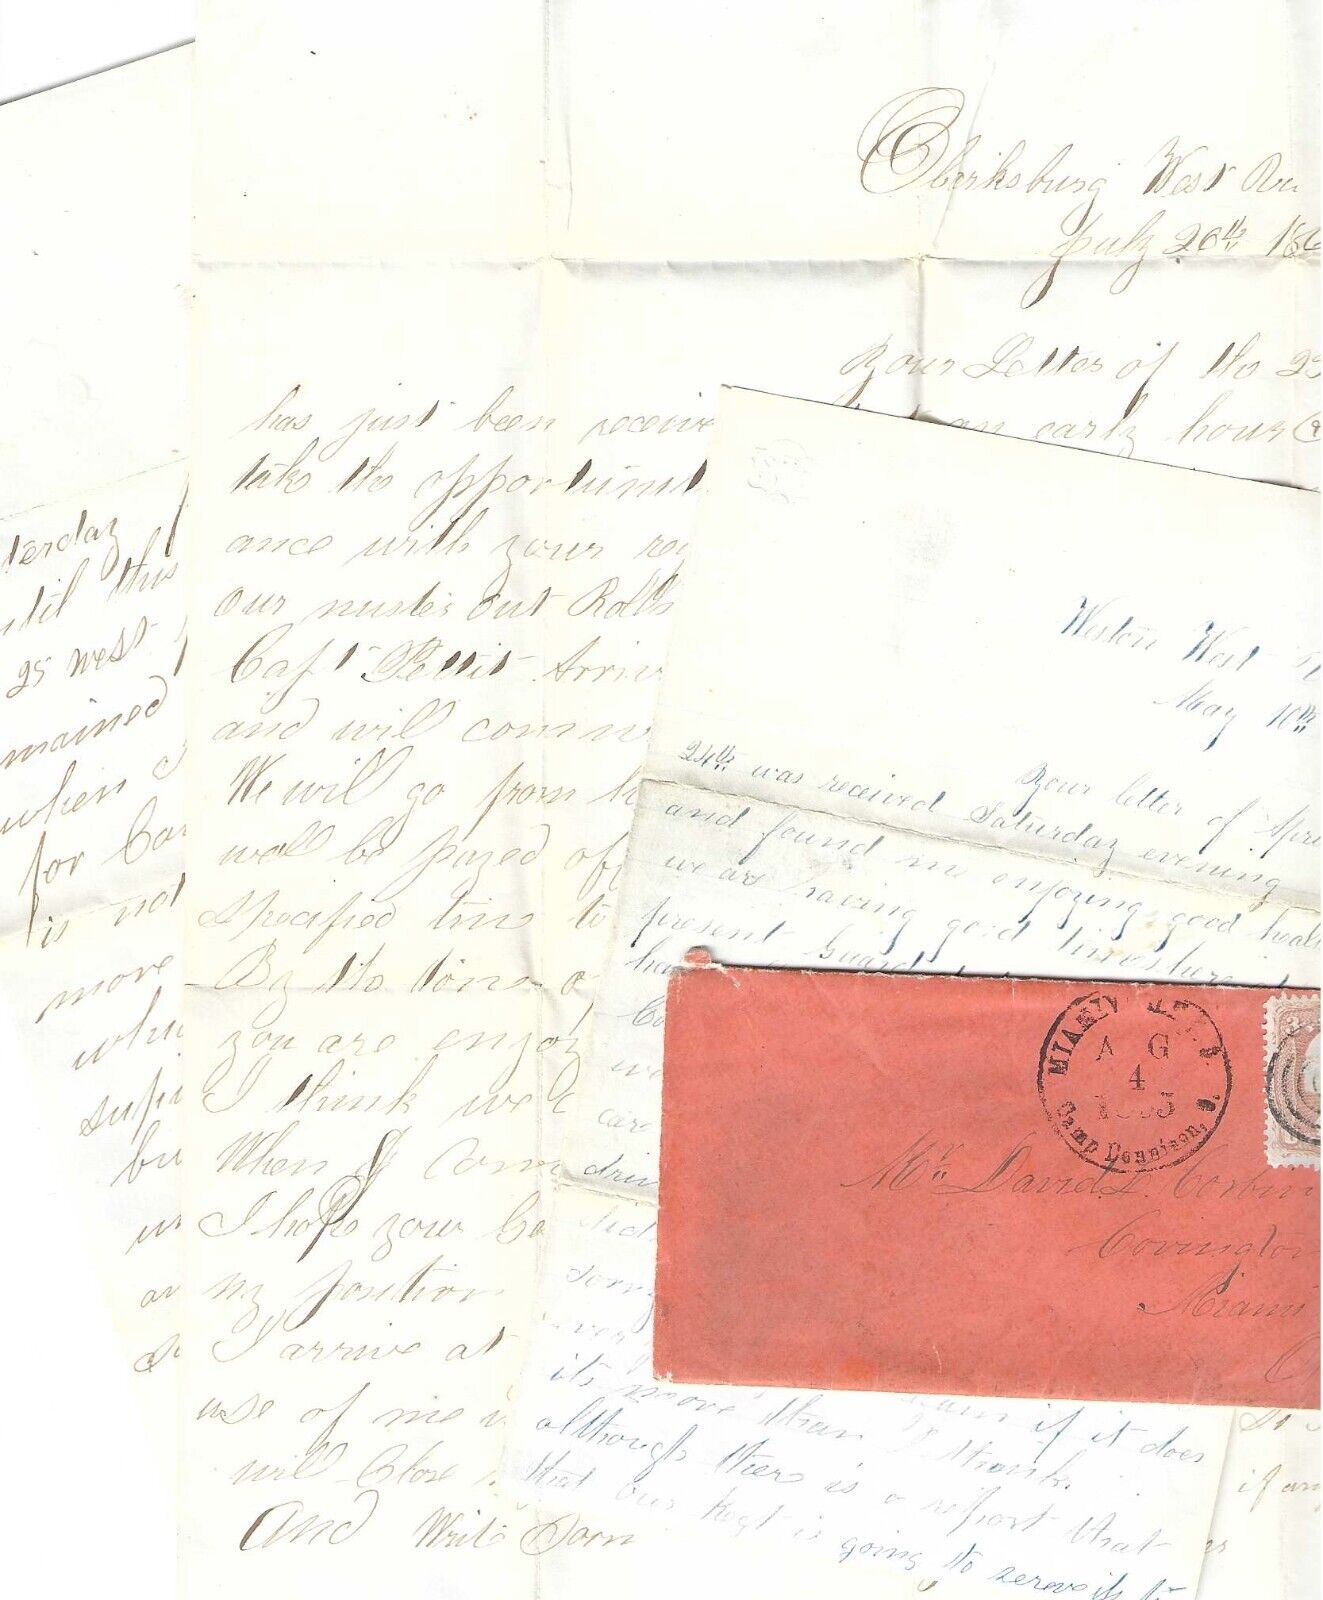 Civil War Letters Reflect Pangs Of Mustering Out After The War